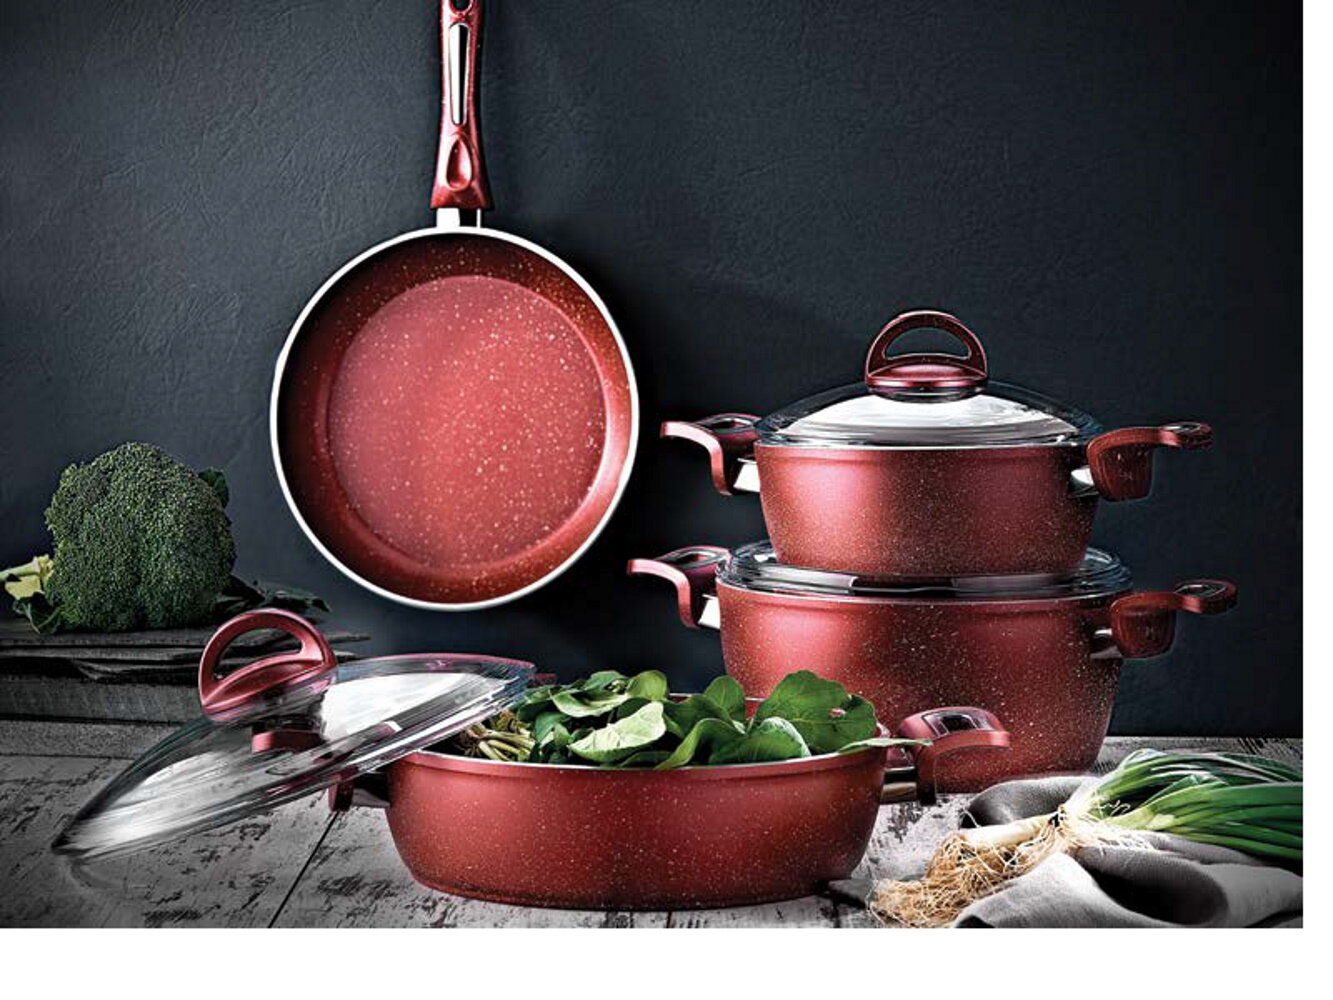 Nesting 11 Pc Nonstick Cookware Set - Red